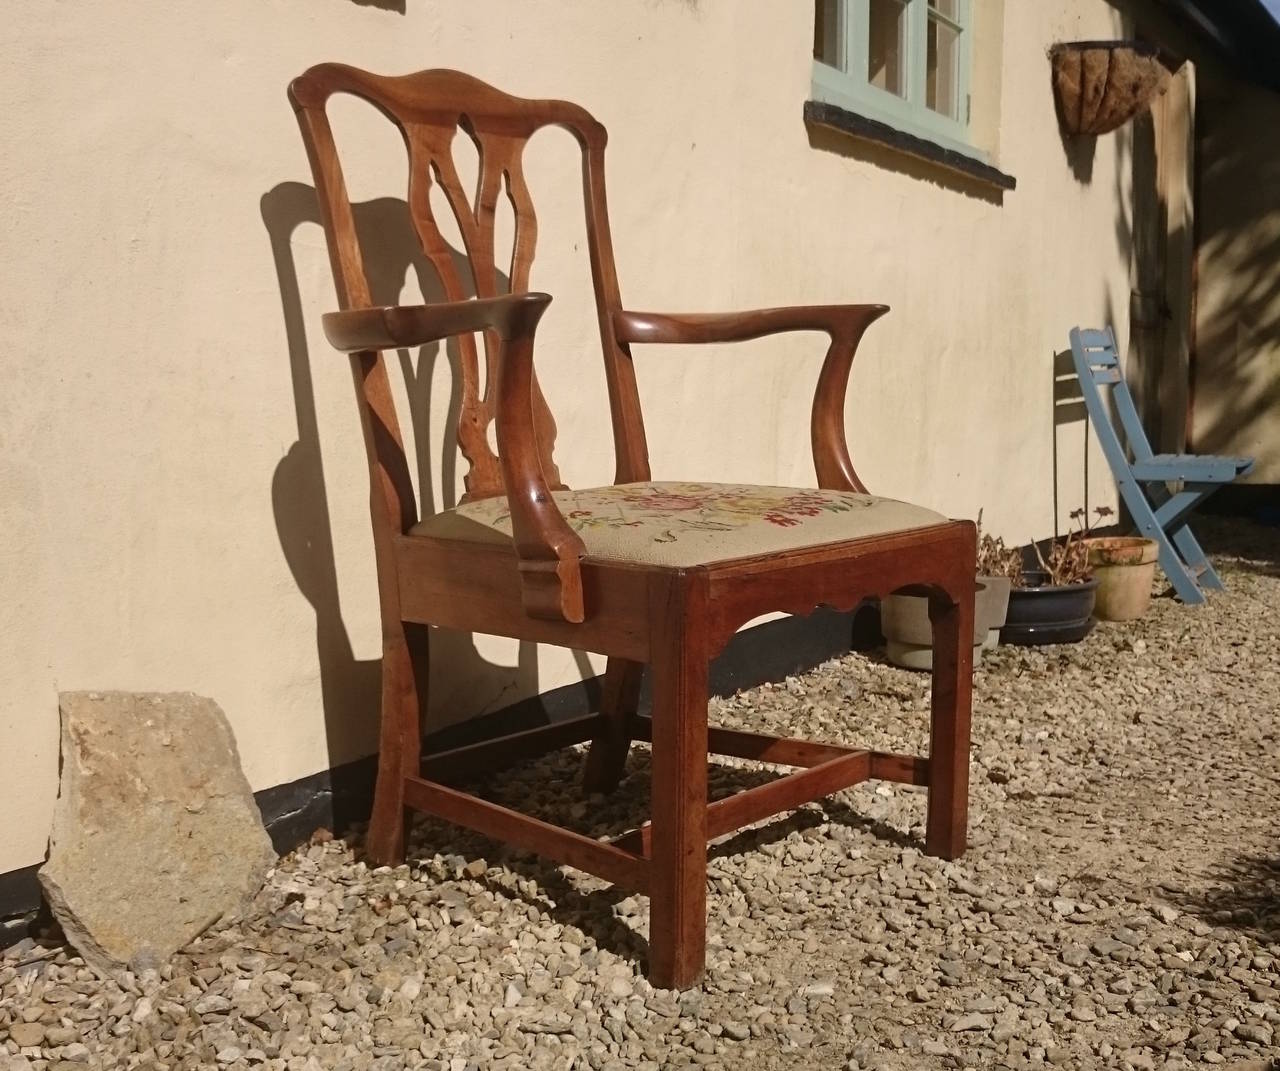 Early 18th century antique armchair made of walnut. This chair is a great scale and would be good in a library or behind a desk. This is a very old chair so there are some old repairs and some long dead wood worm in the show wood. If you are buying